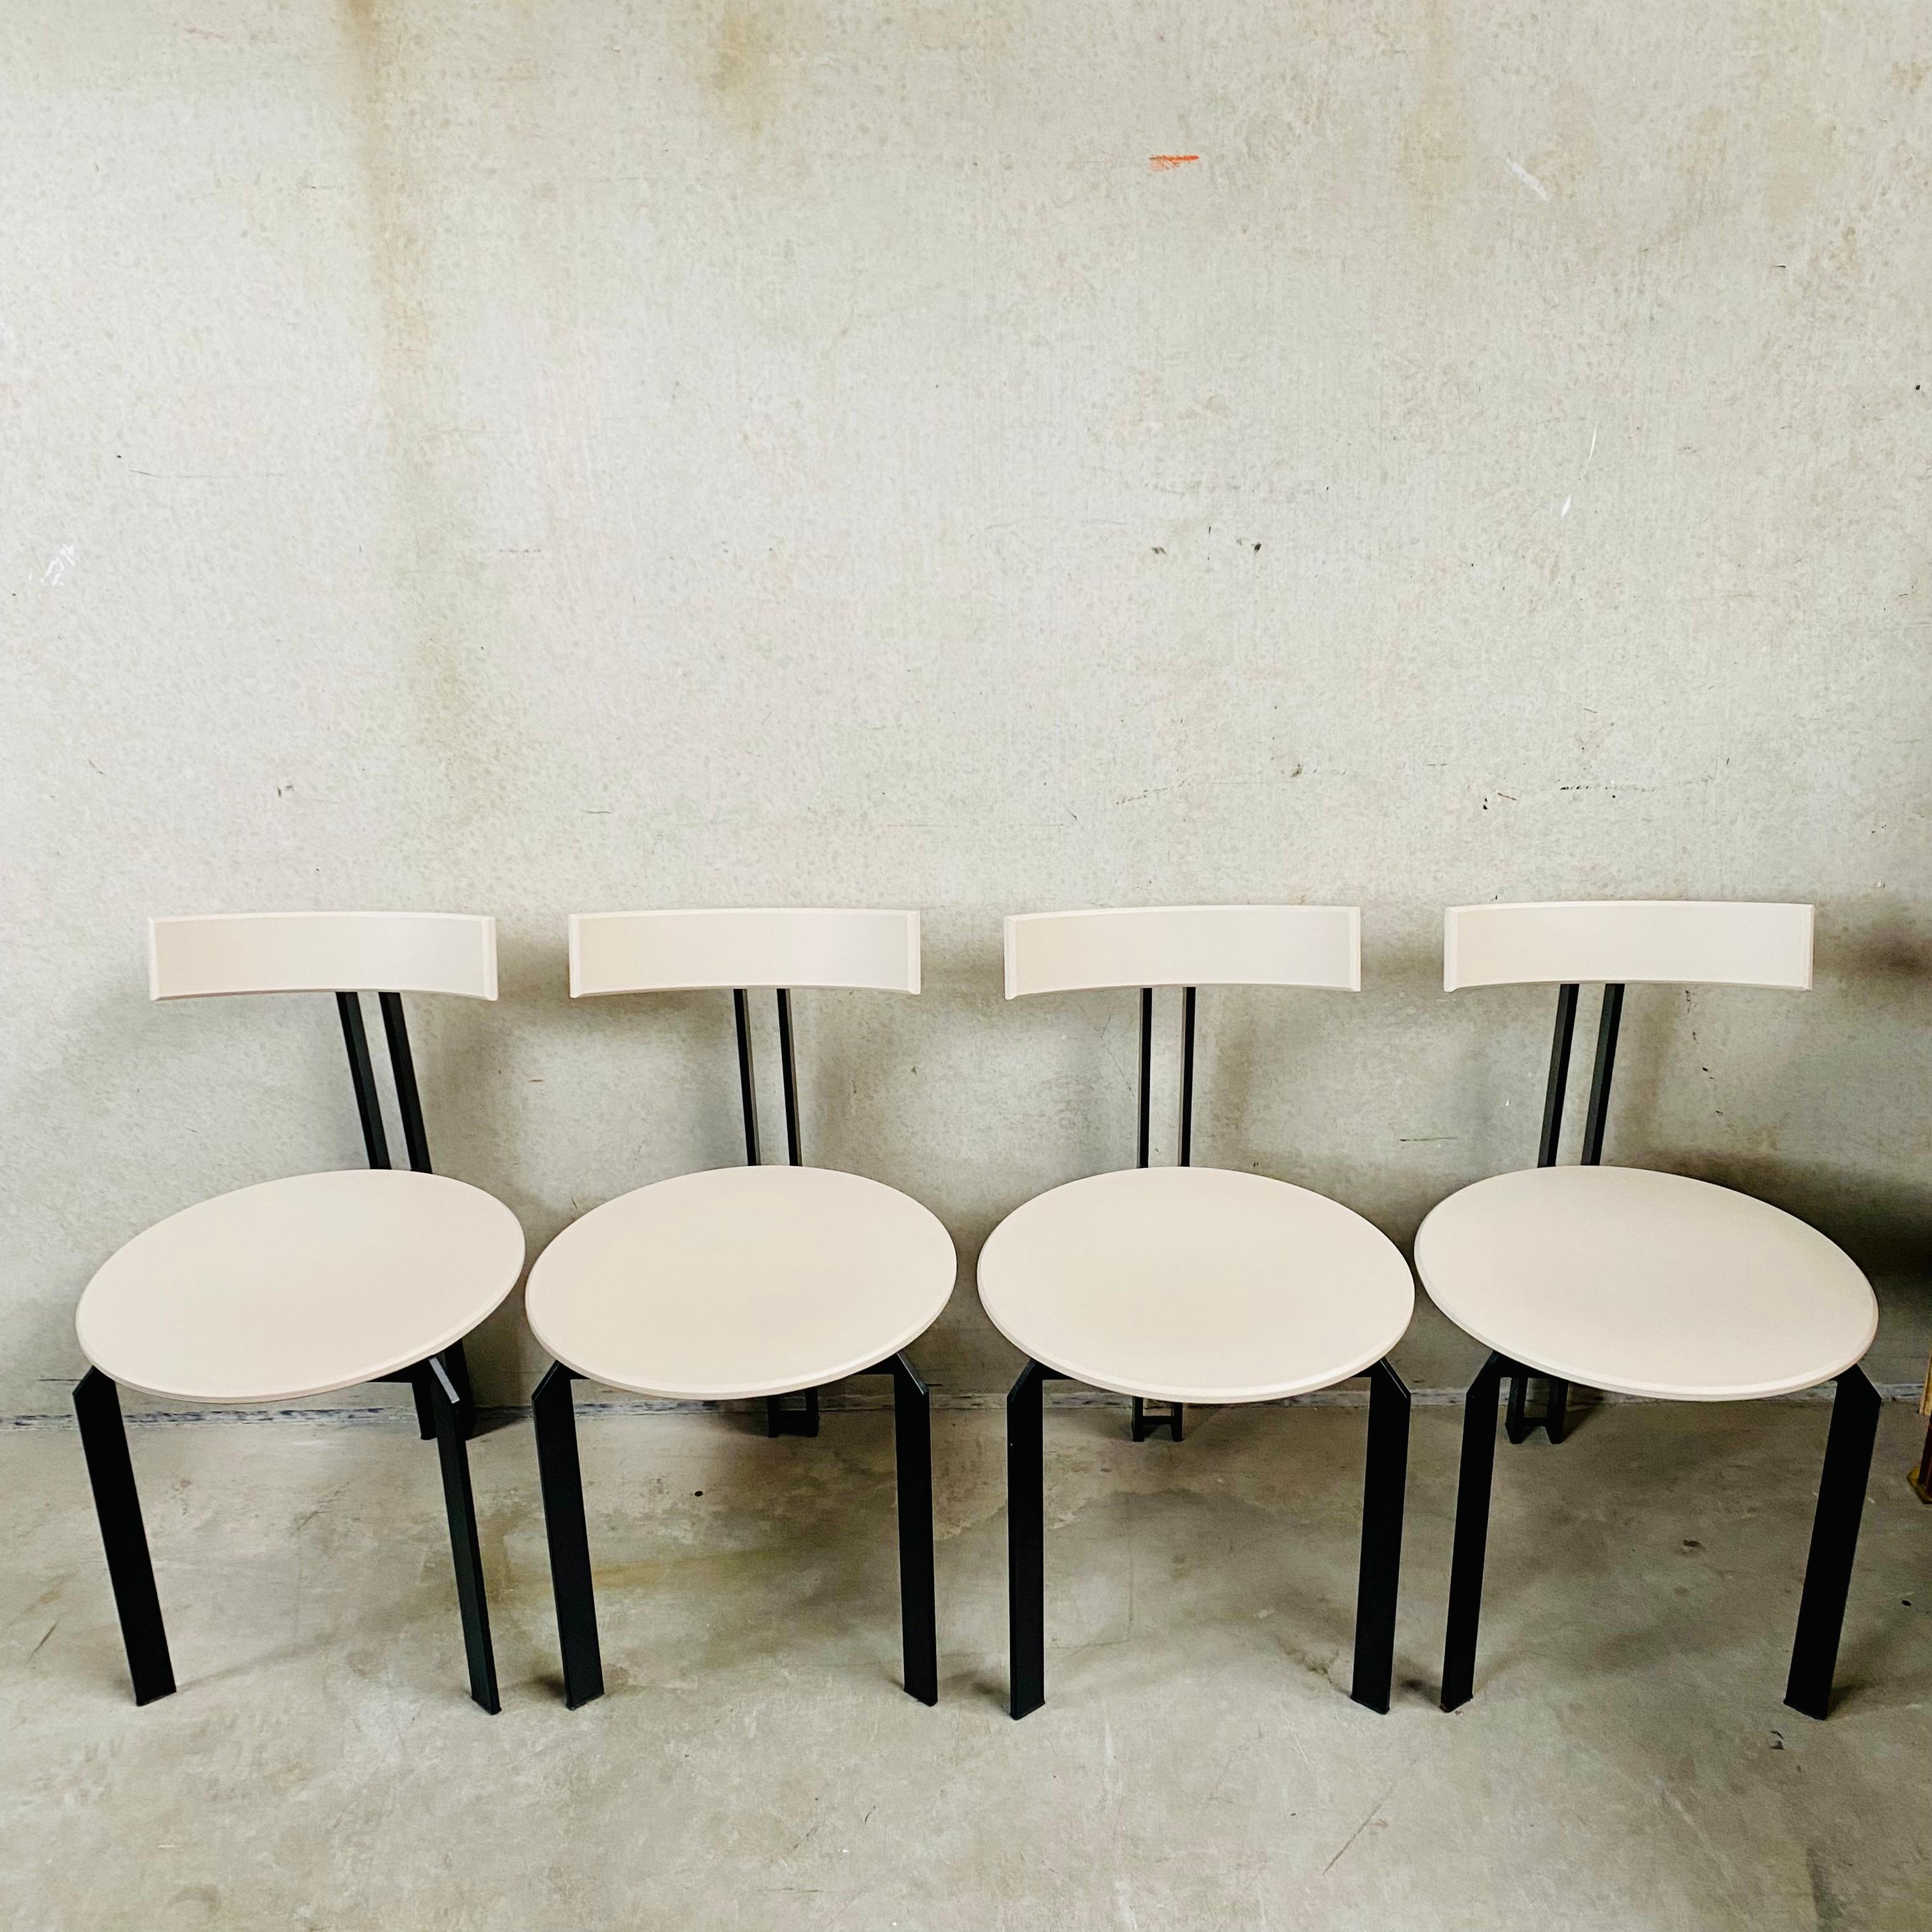 4 x Brutalist ZETA Dining Chairs by Martin Haksteen for Harvink, Netherlands  For Sale 8